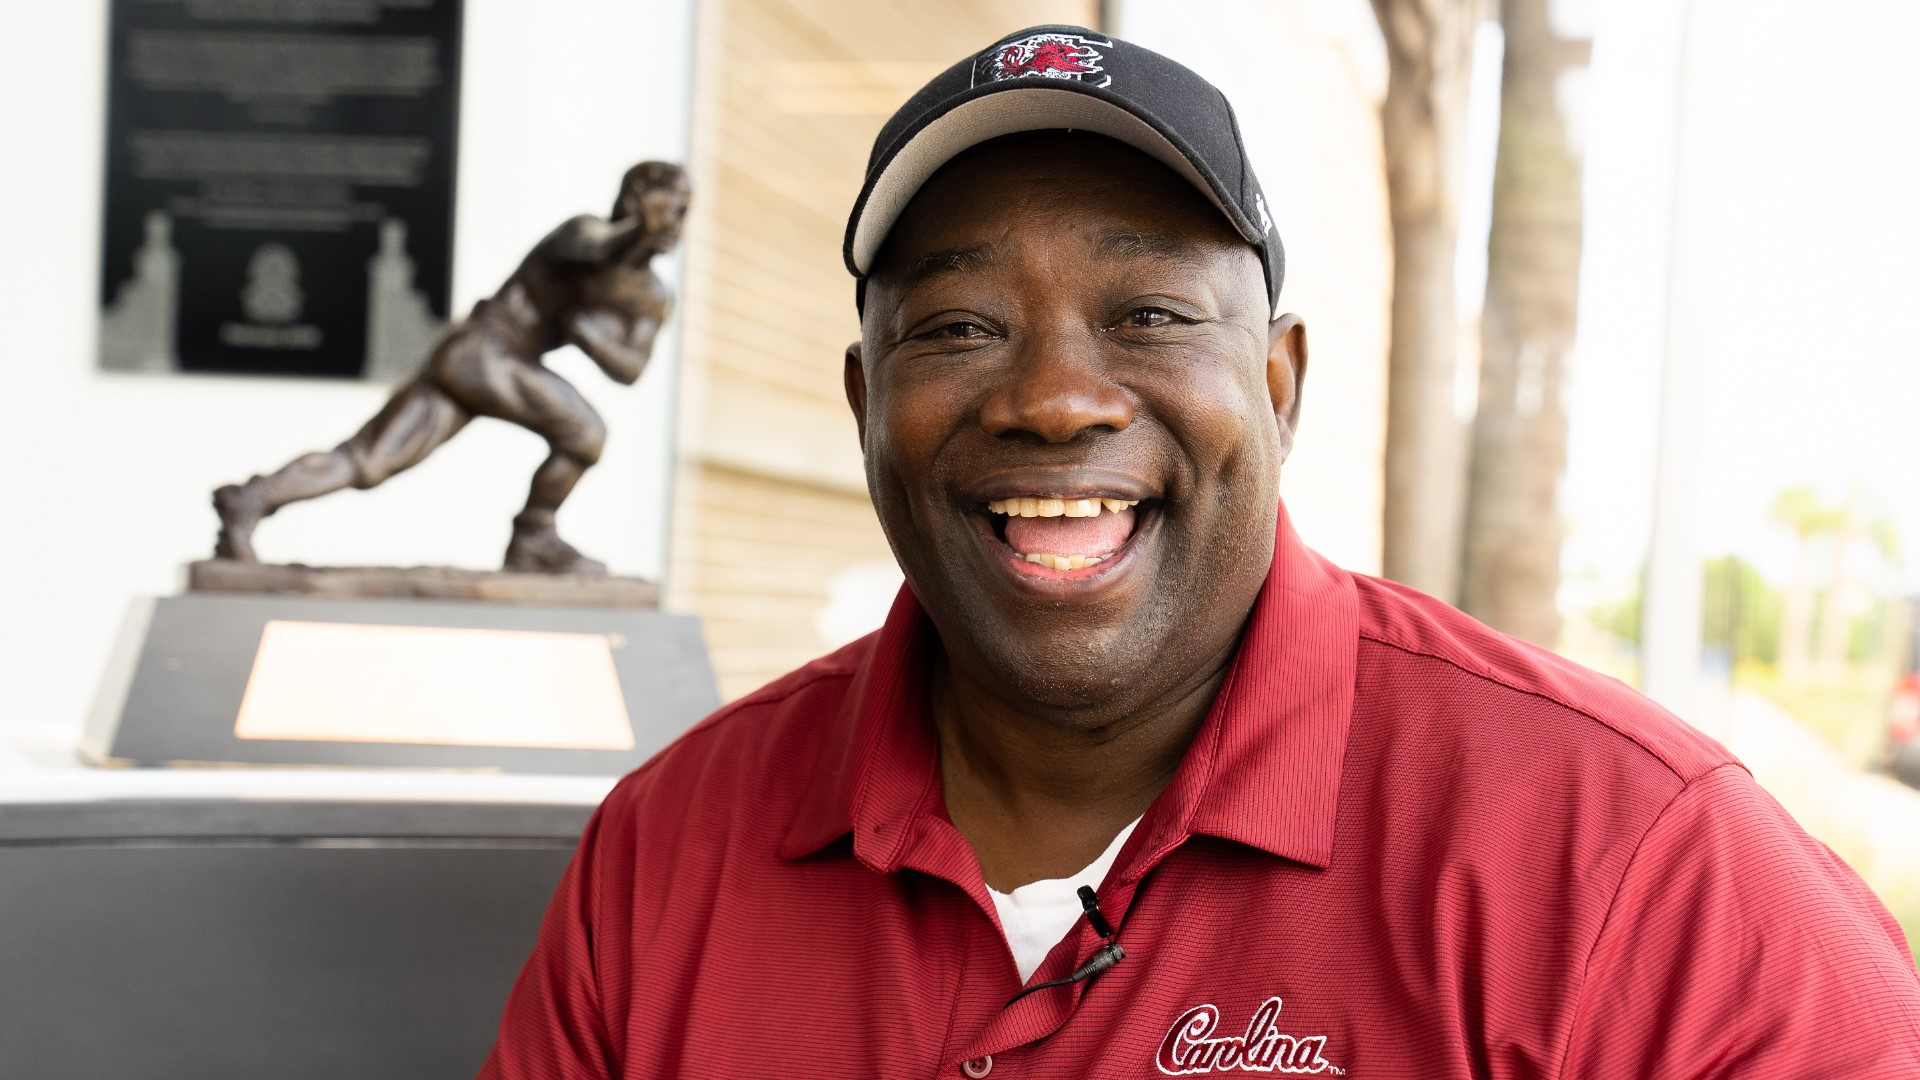 South Carolina Gamecocks legend George Rogers left it all on the football field, and then some, in his career. His many accolades are proof of that.